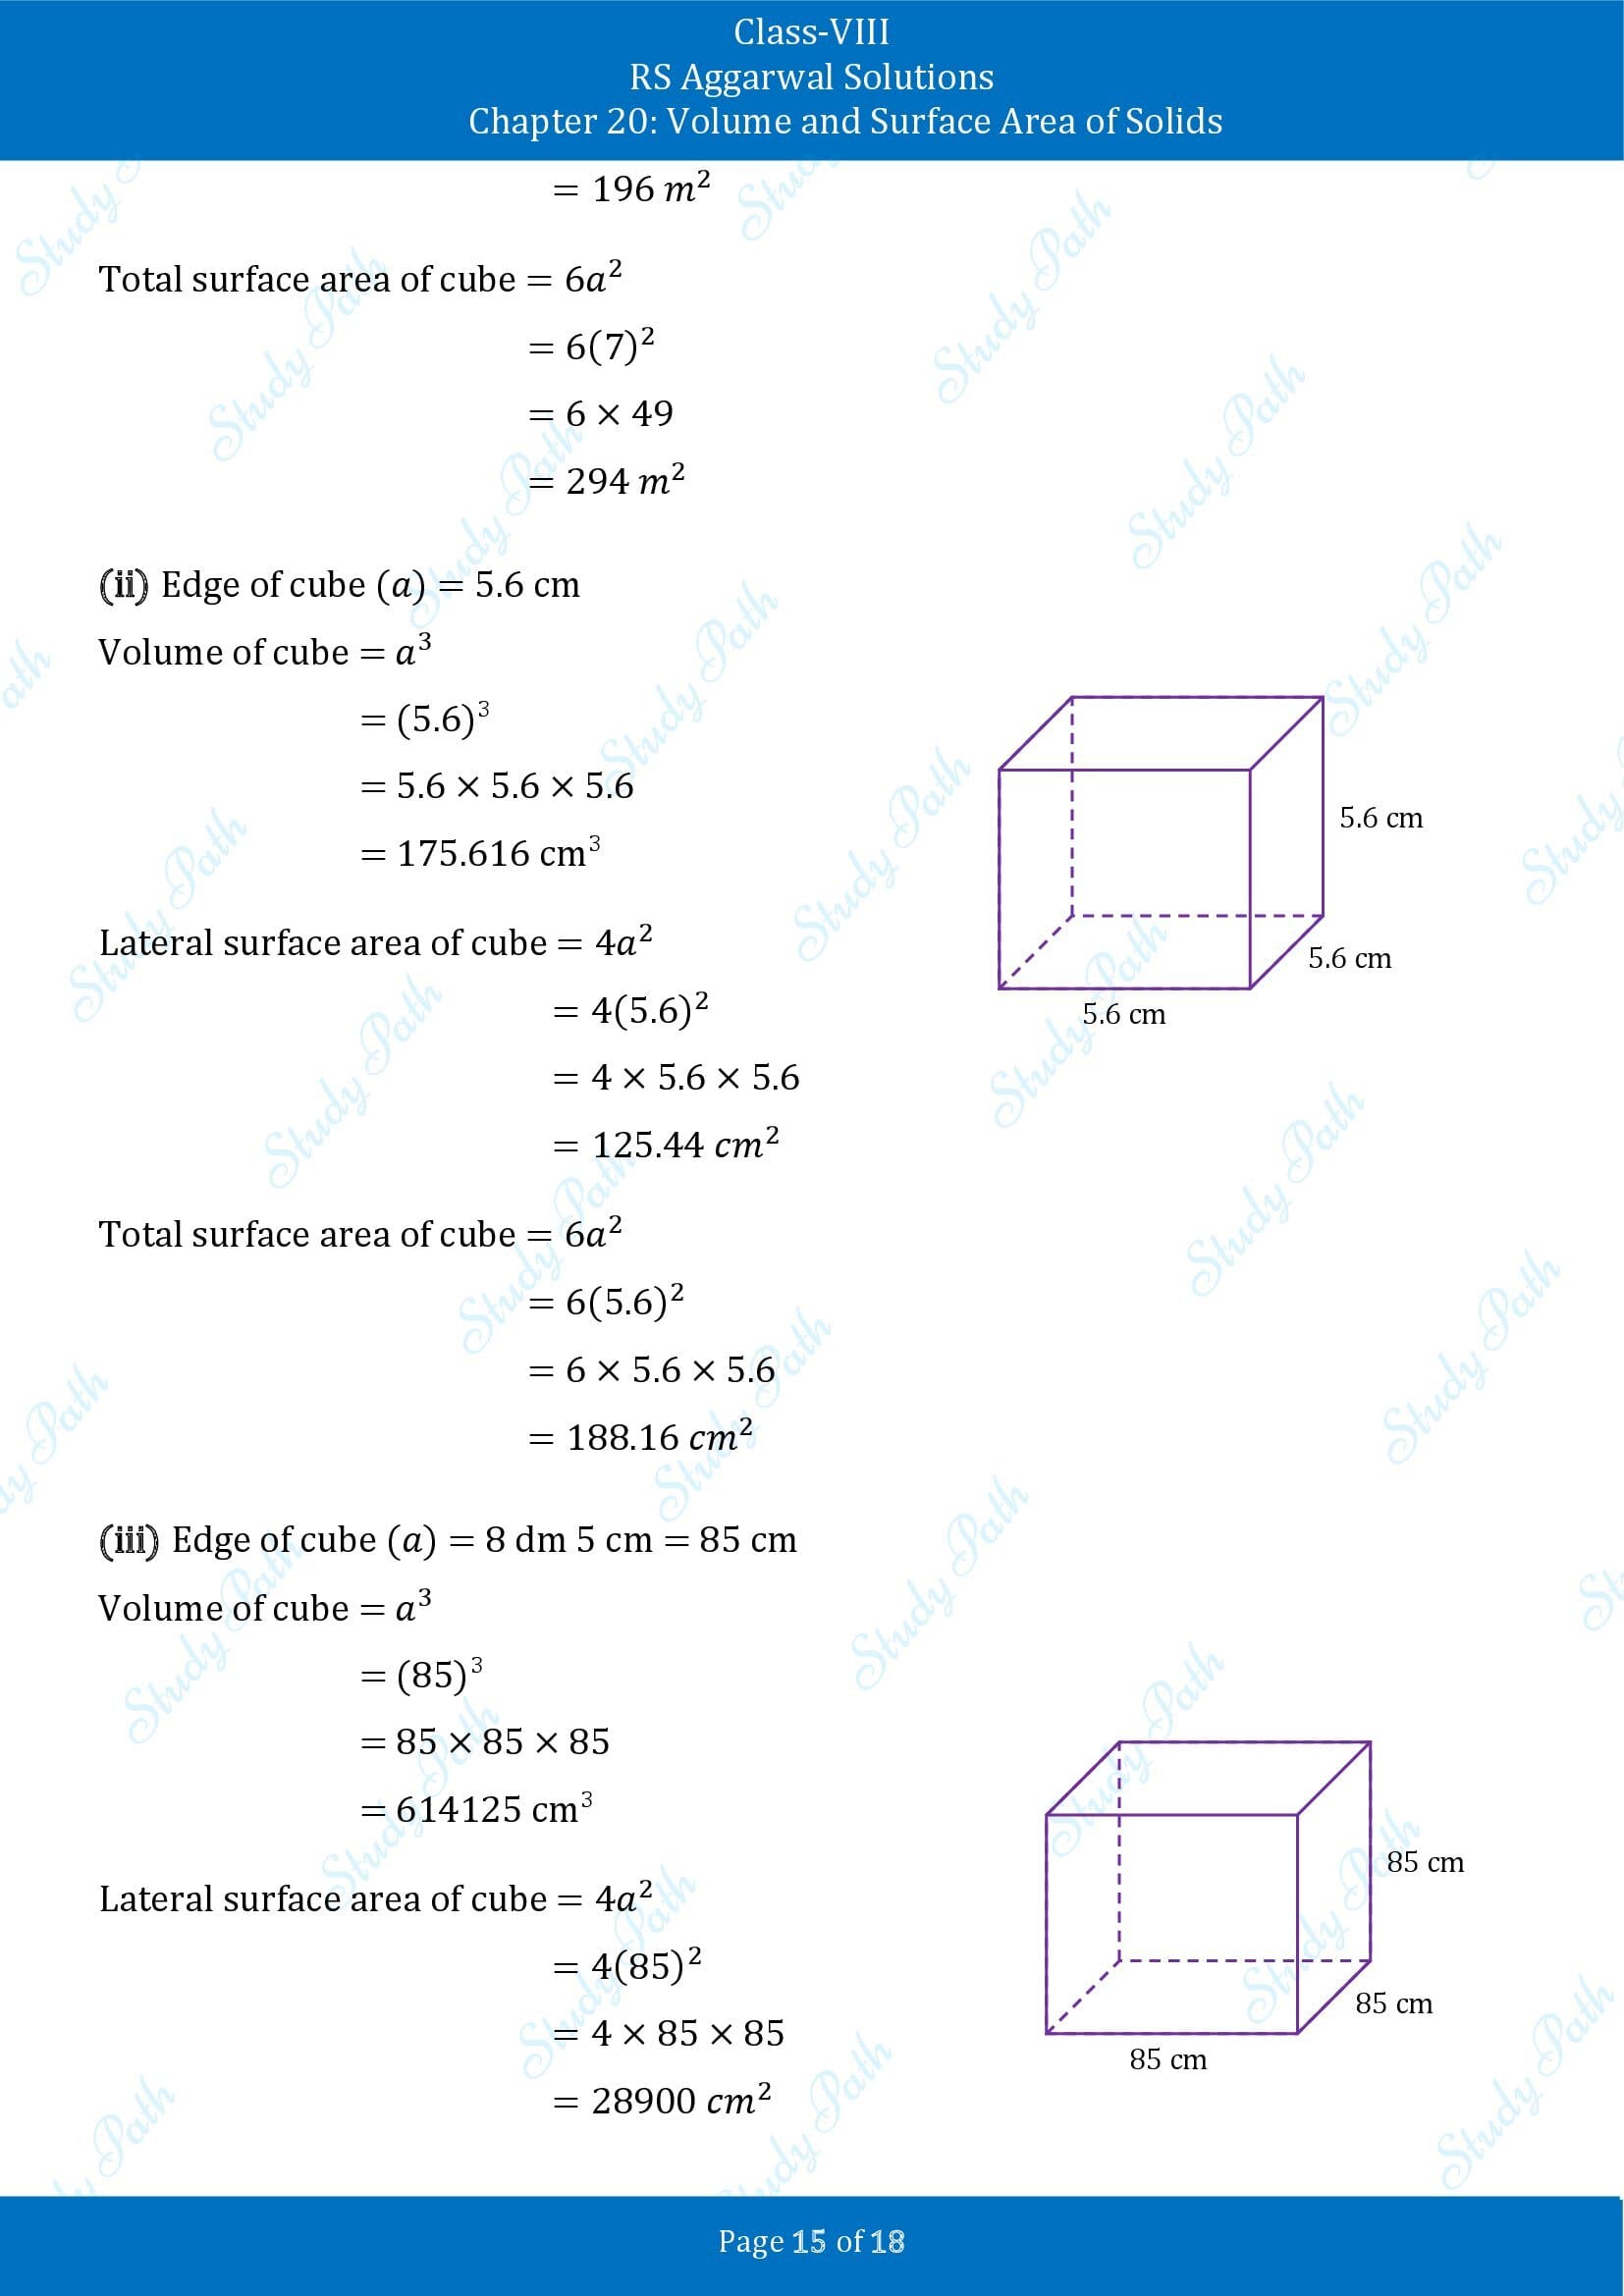 RS Aggarwal Solutions Class 8 Chapter 20 Volume and Surface Area of Solids Exercise 20A 00015